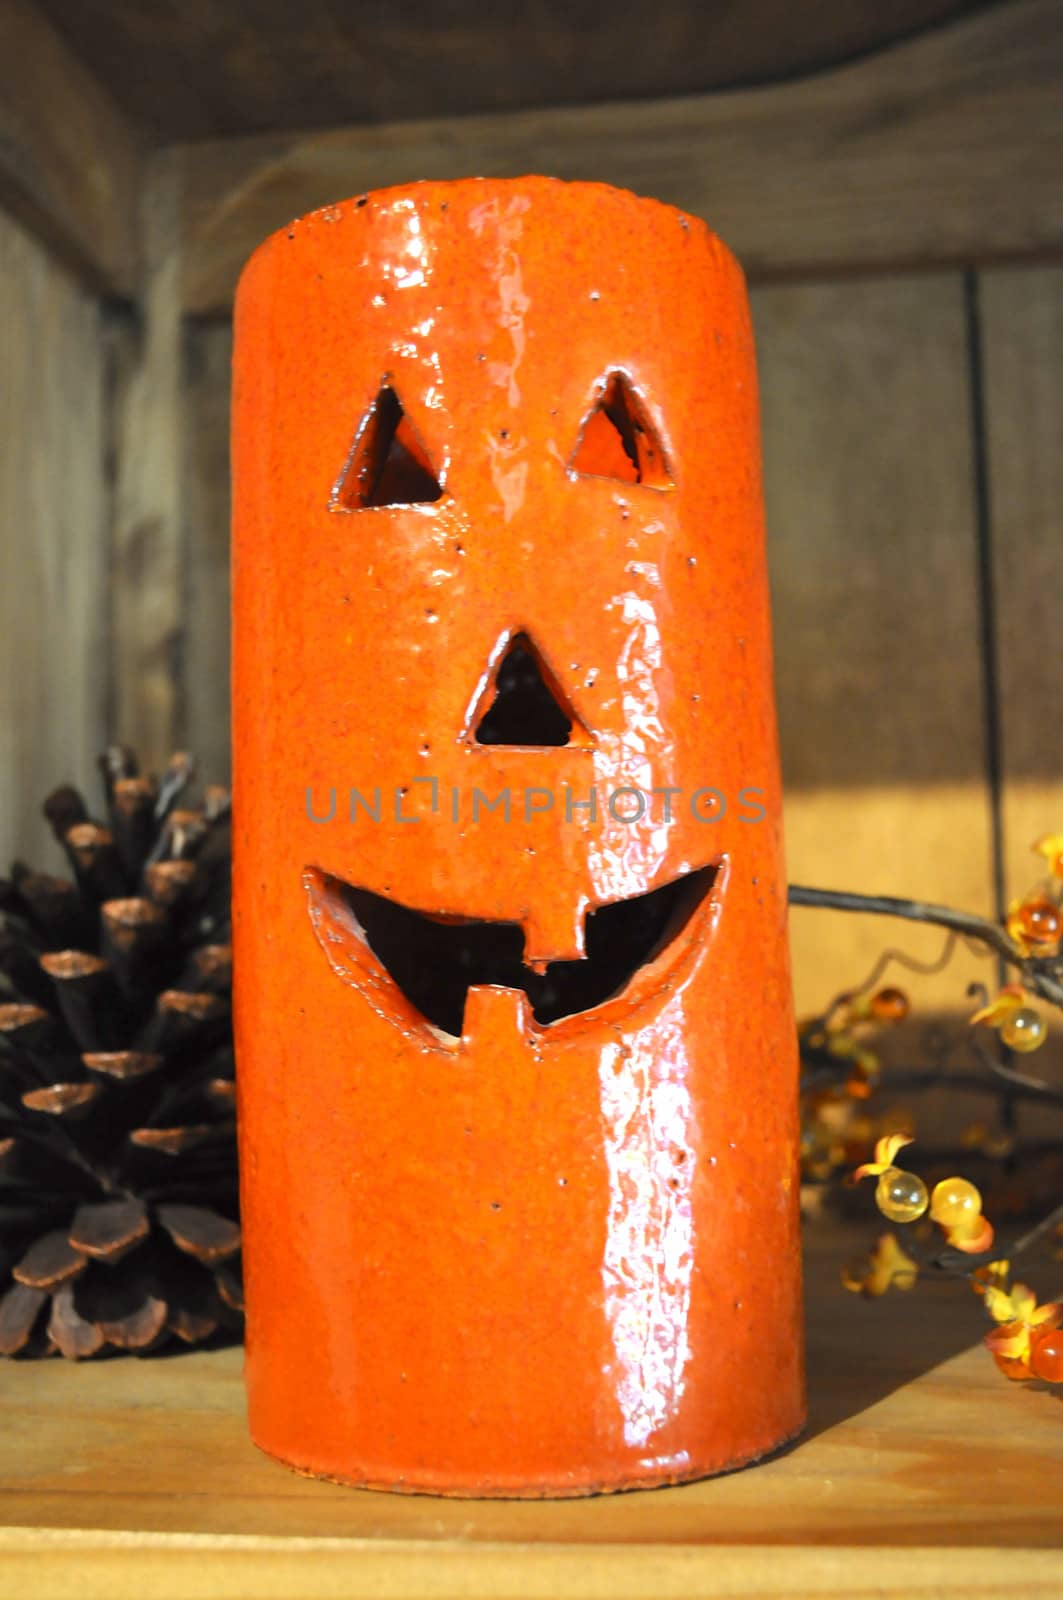 Pumpkin Face Candle by RefocusPhoto